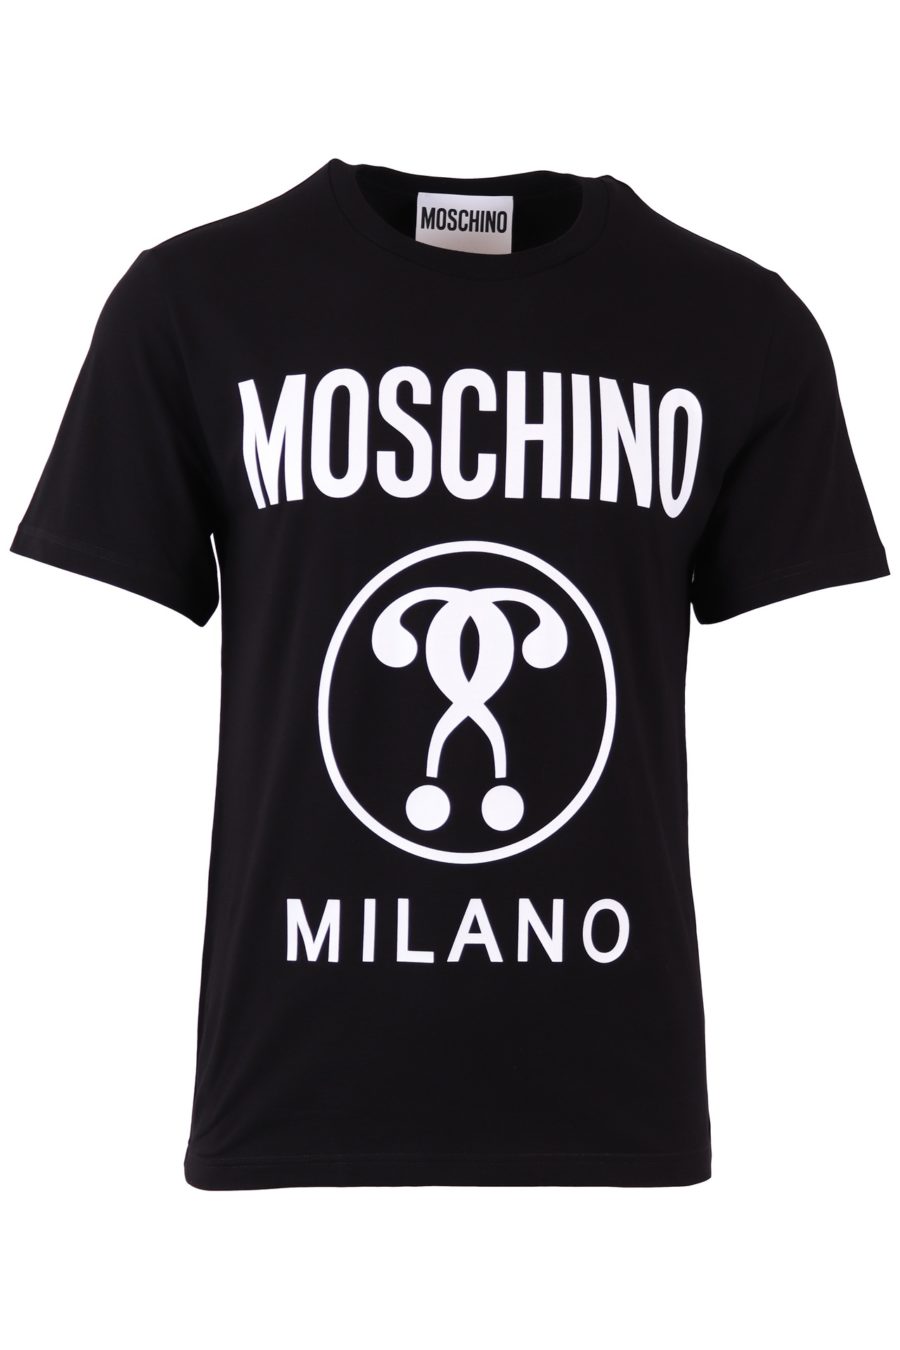 Moschino Couture black T-shirt with logo and double front question - c53a4e4af4af40007f0086e65eda6be386dcc8db177